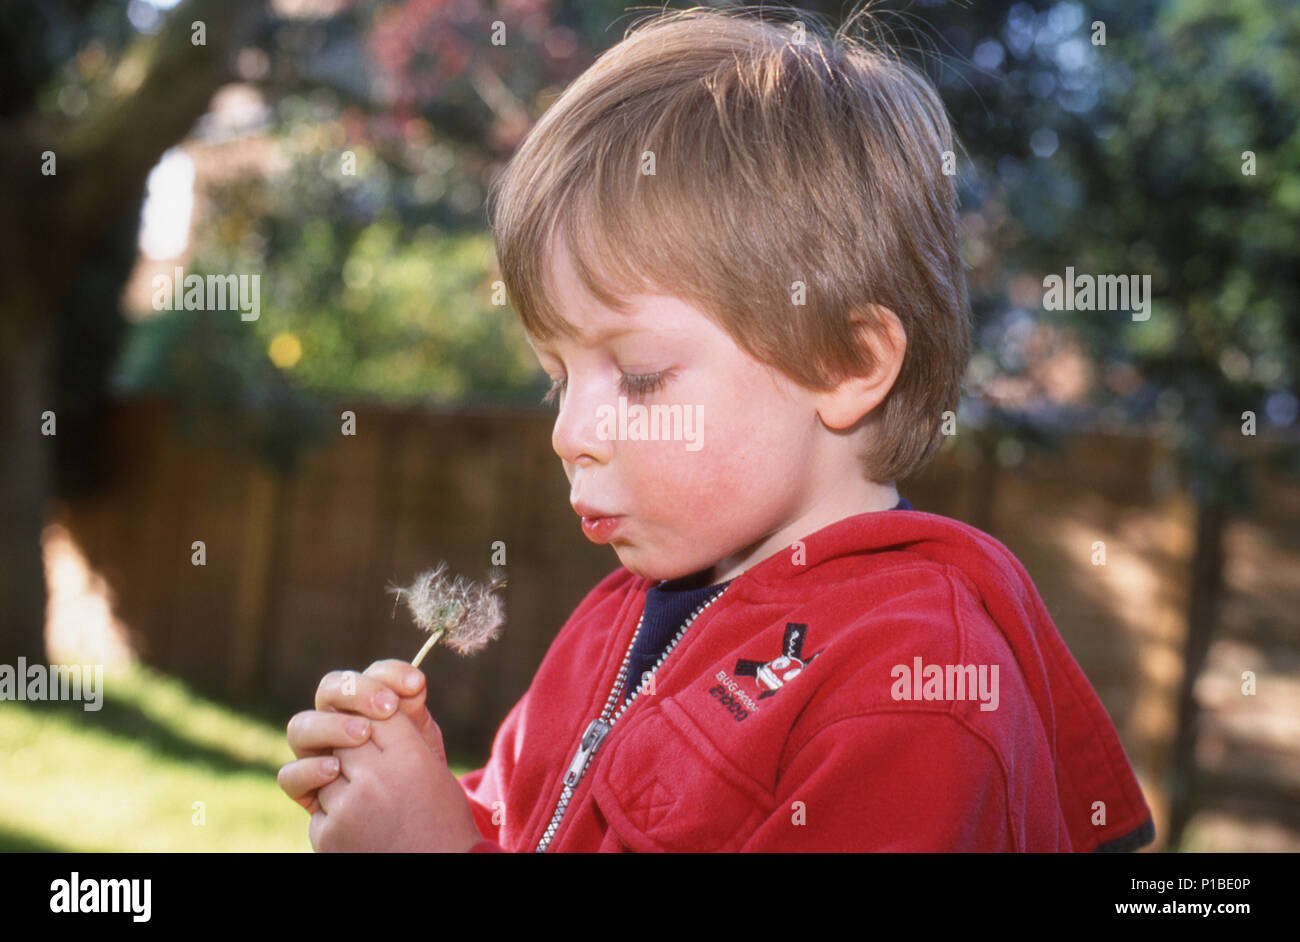 Young boy three years old blowing on a dandelion to tell the time. Stock Photo